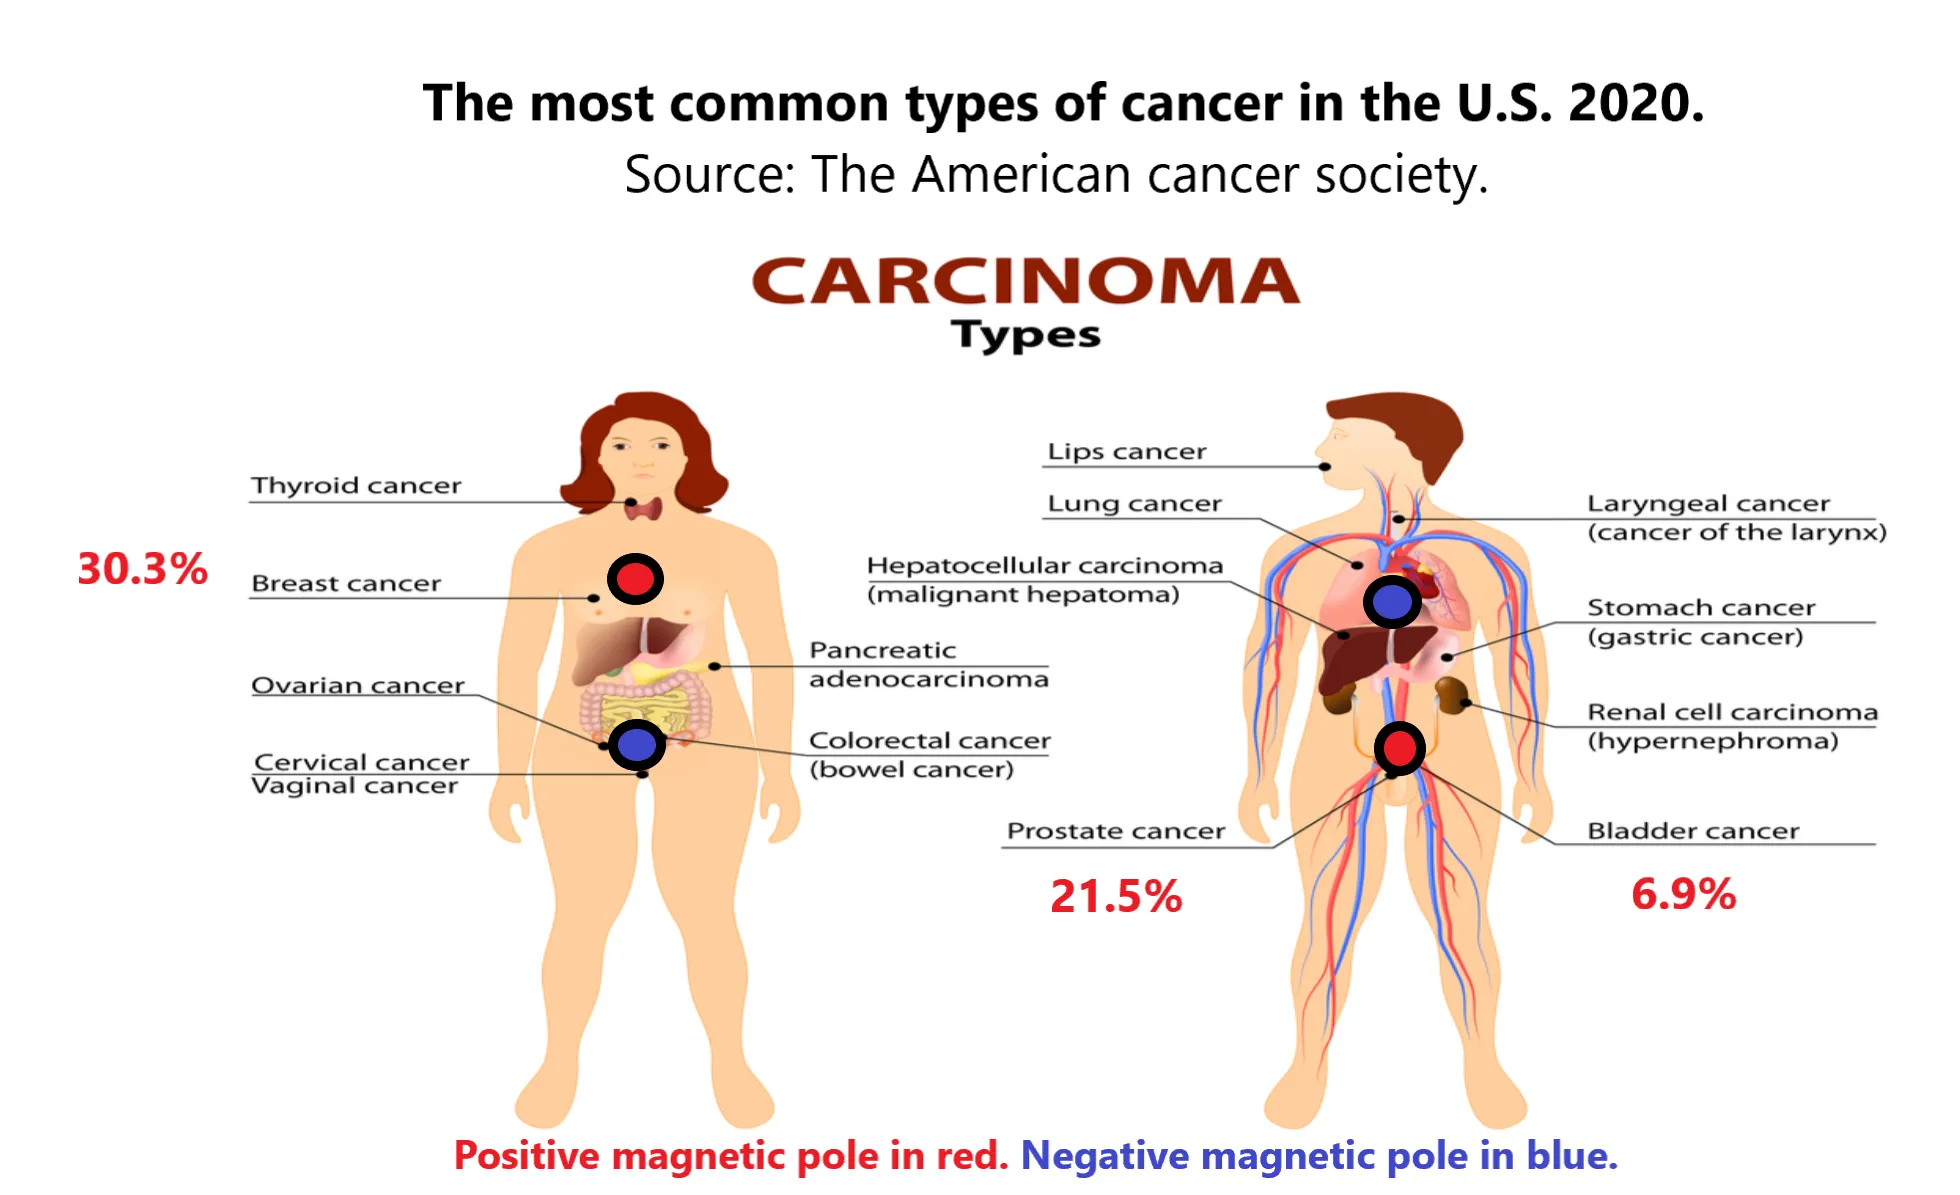 The common types of cancer in the U.S. 2020.